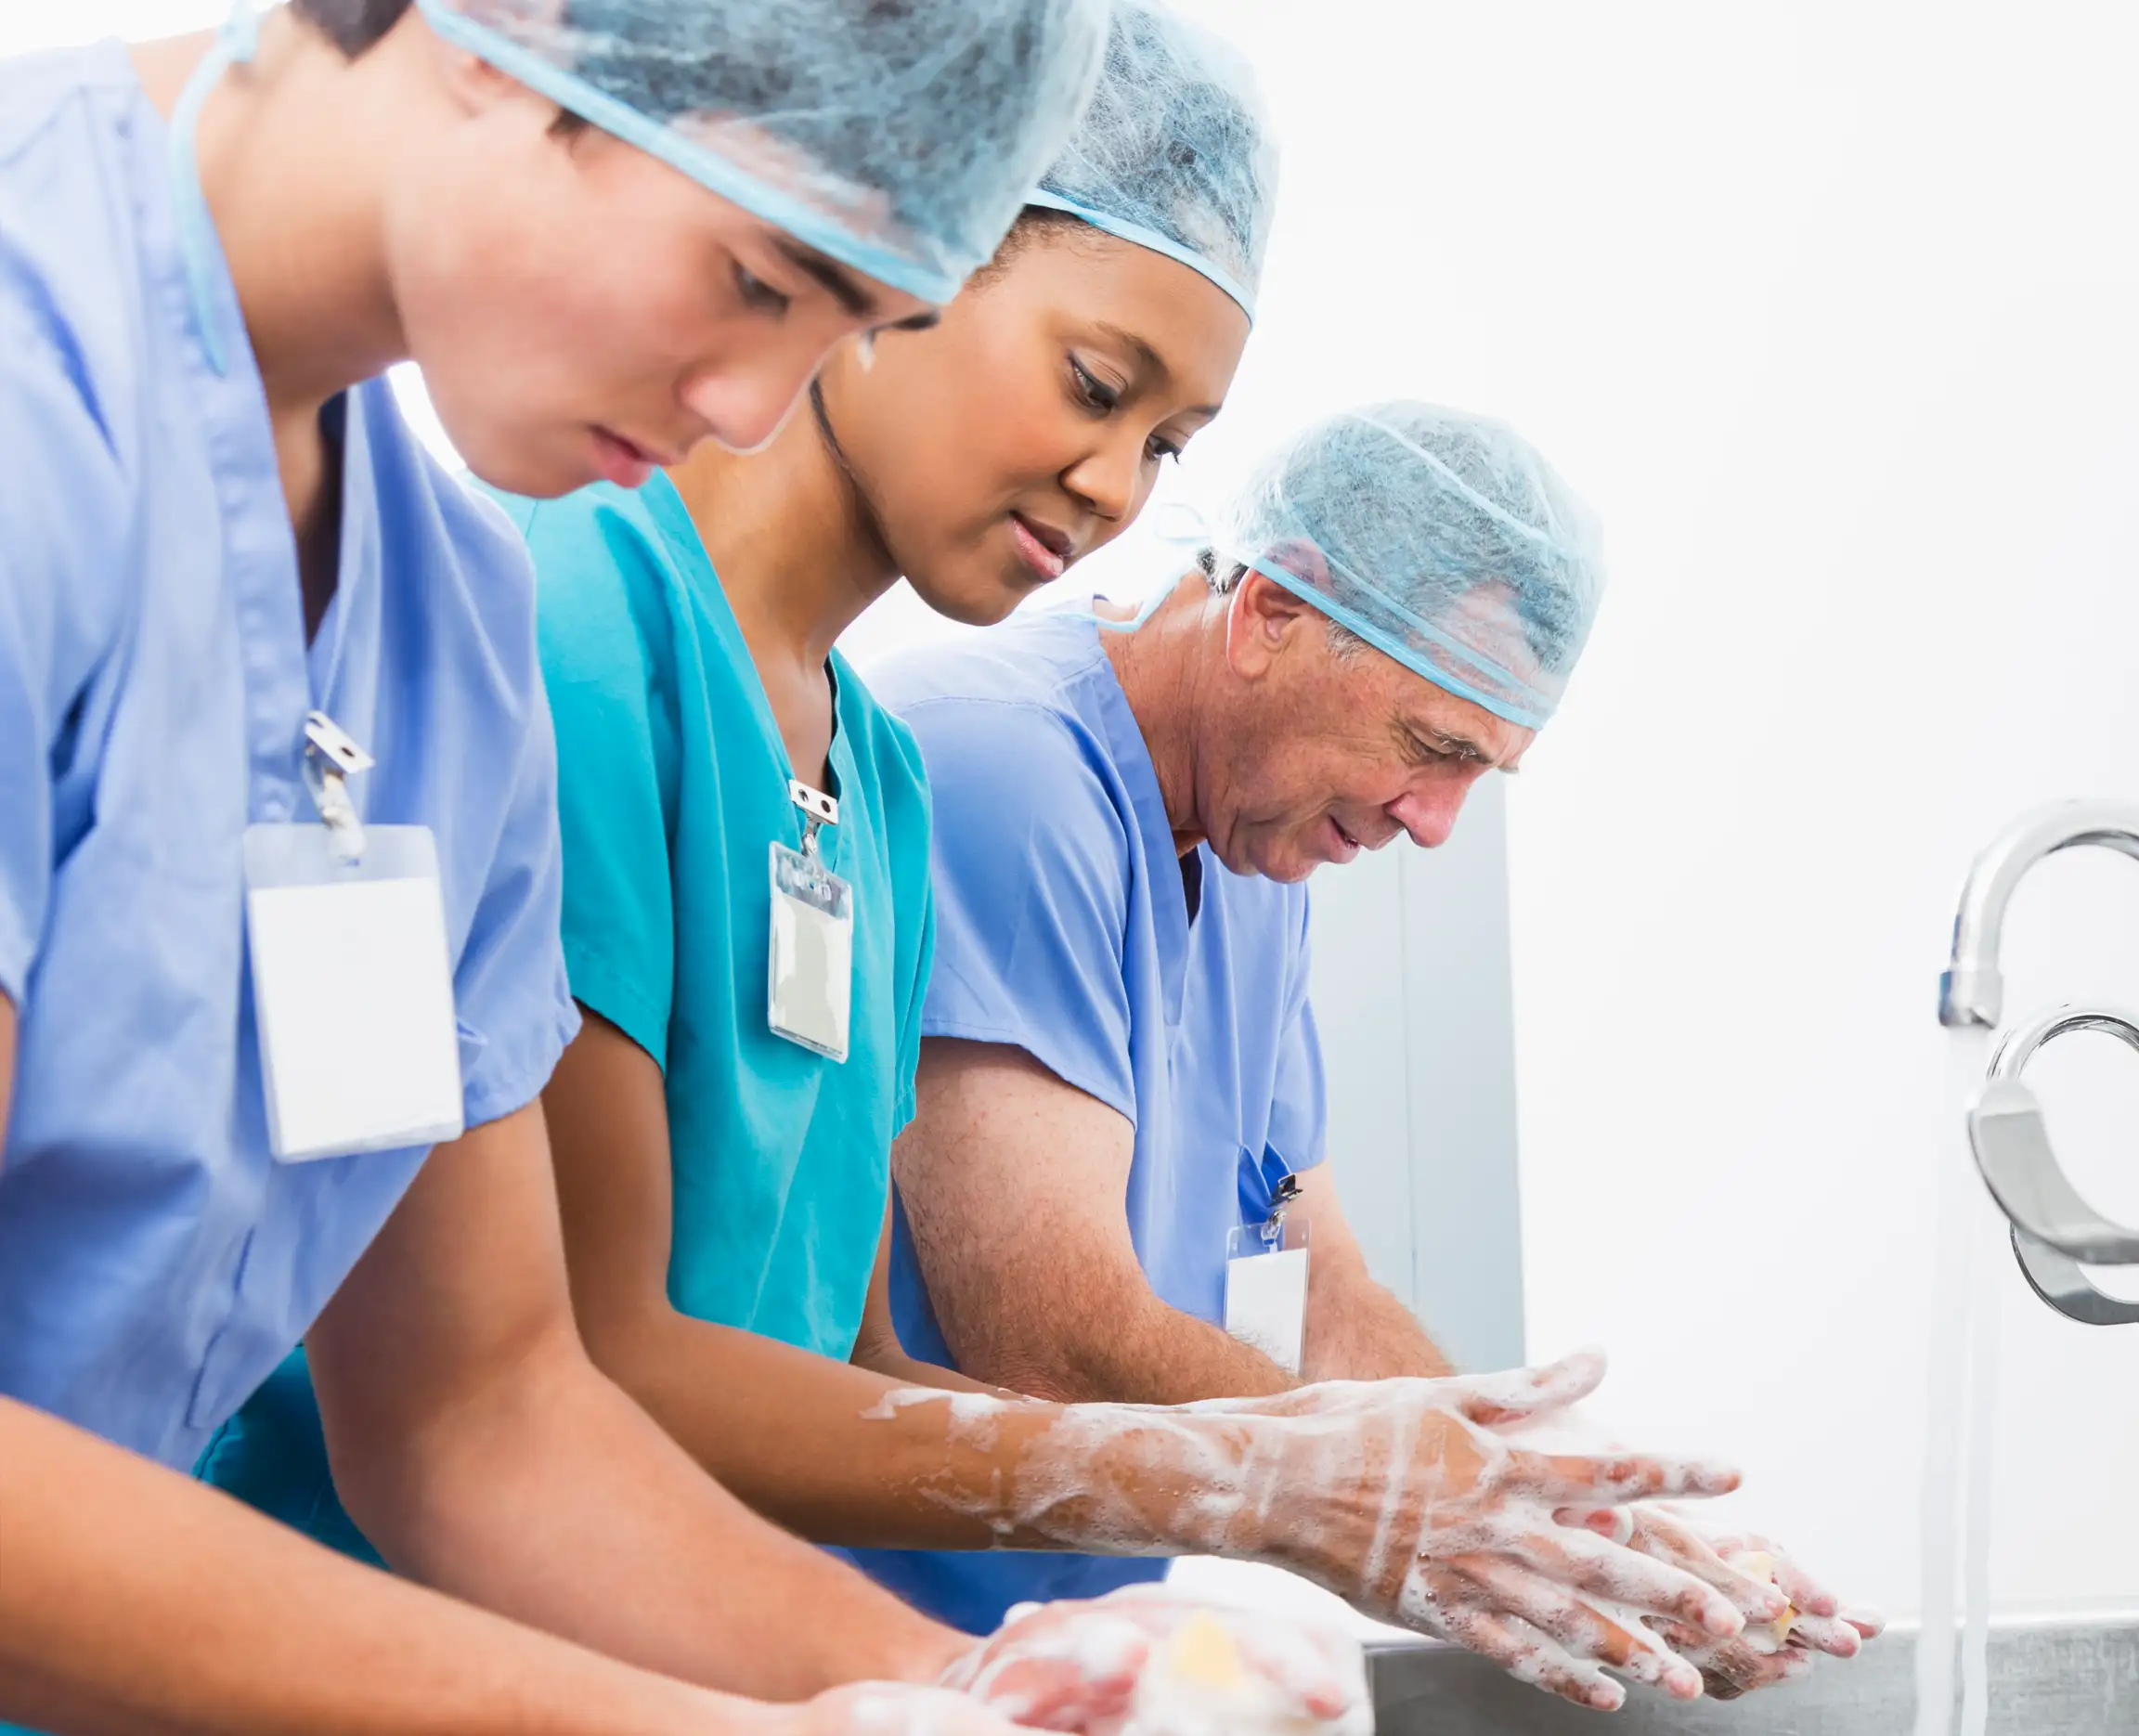 Surgeons preparing for surgery by washing their hands.